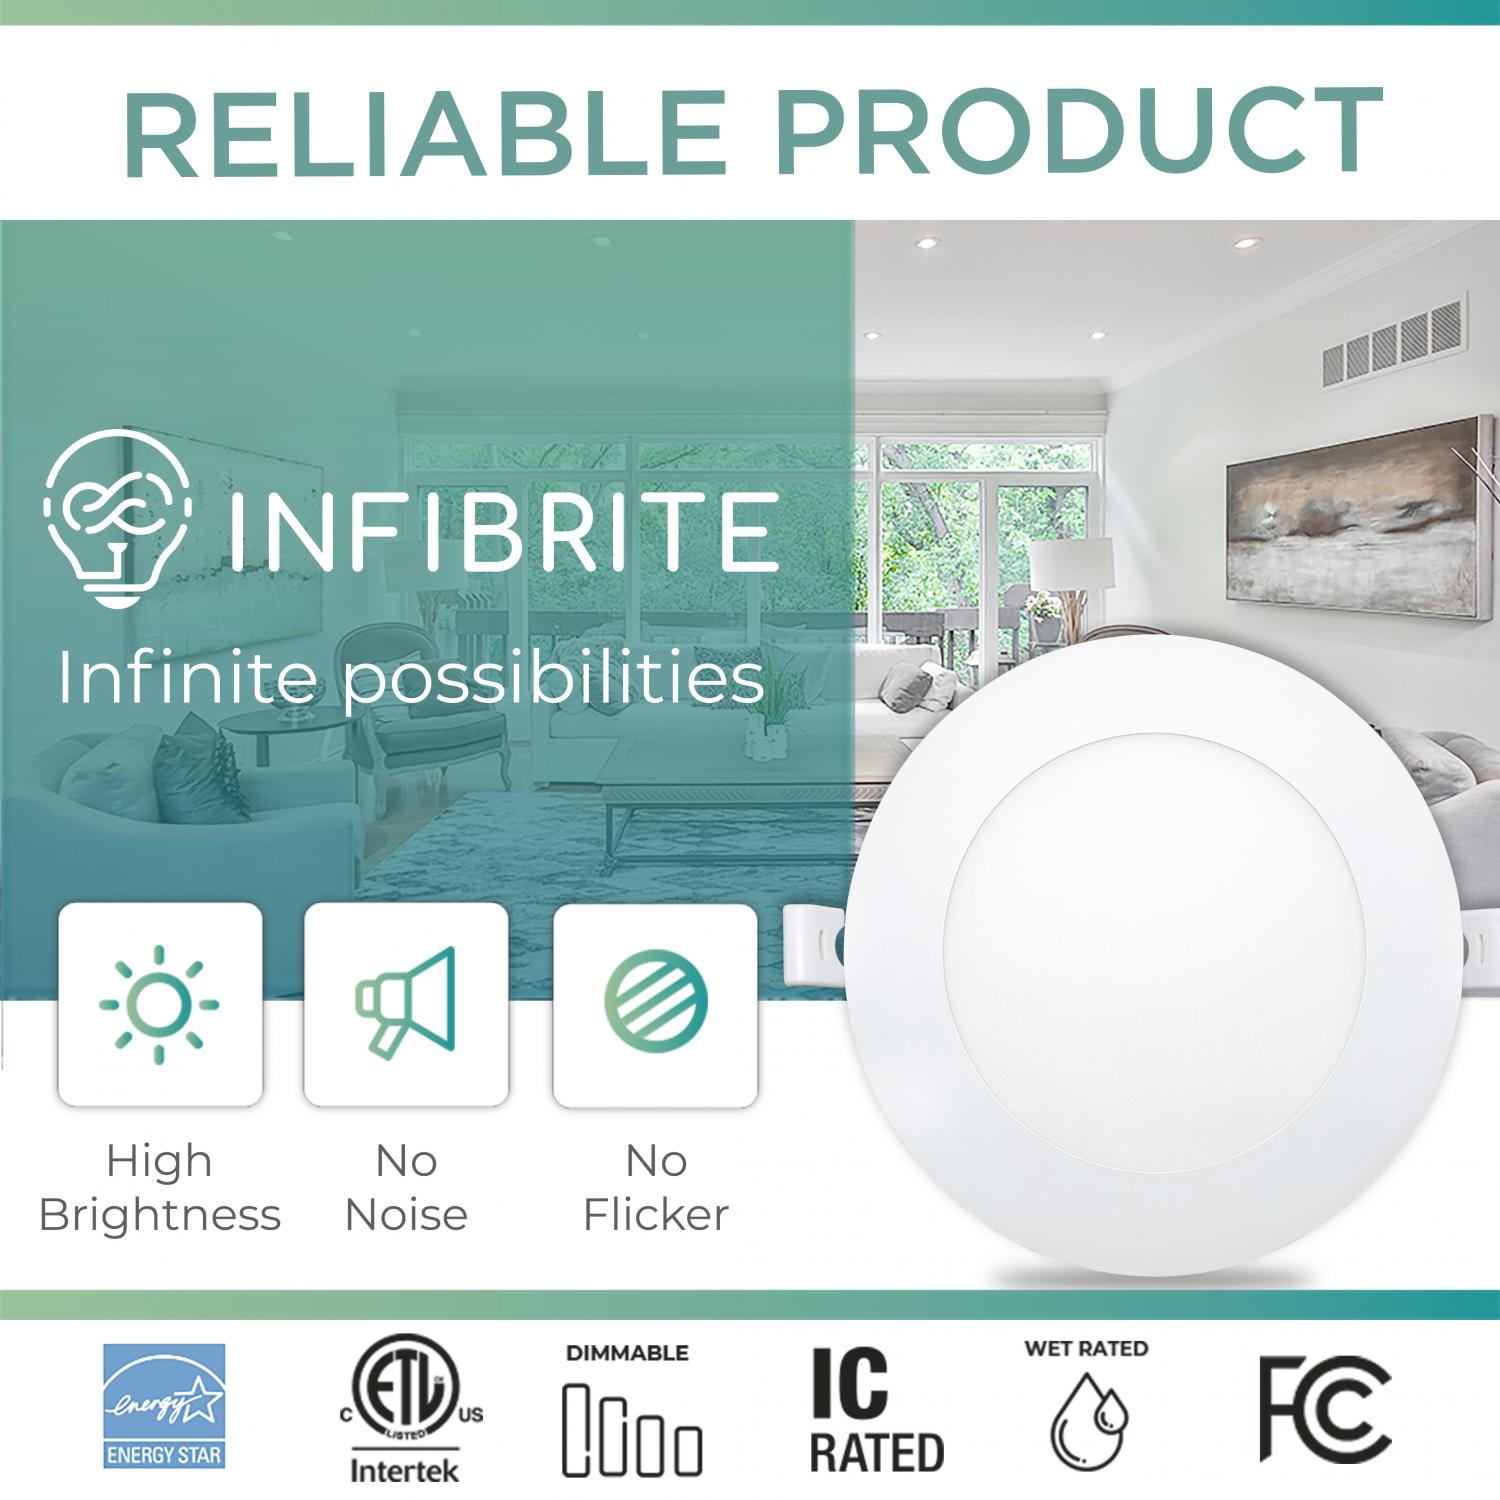 Infibrite 4 Inch 2700K Soft White  9W 750 LM Ultra-Slim LED Ceiling Light with Junction Box, Flush Mount, Dimmable, Fixture for Bedroom, Wet Rated for Bathroom Easy Install, 9W 75W, ETL & Energy Star, US Company (6 Pack)